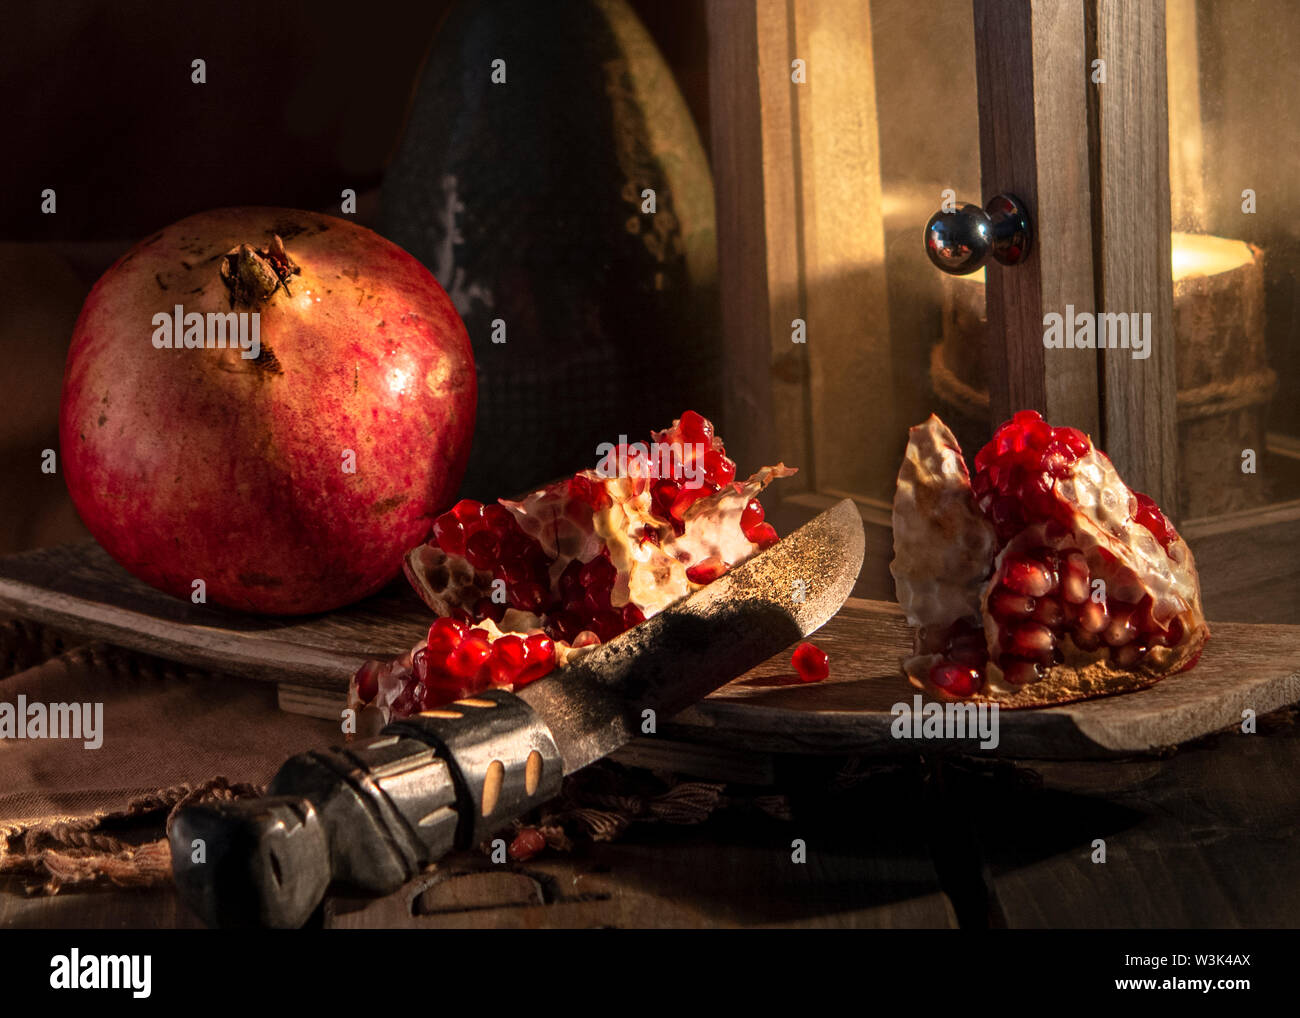 food still life picture with pomegranates and a lighted lantern Stock Photo